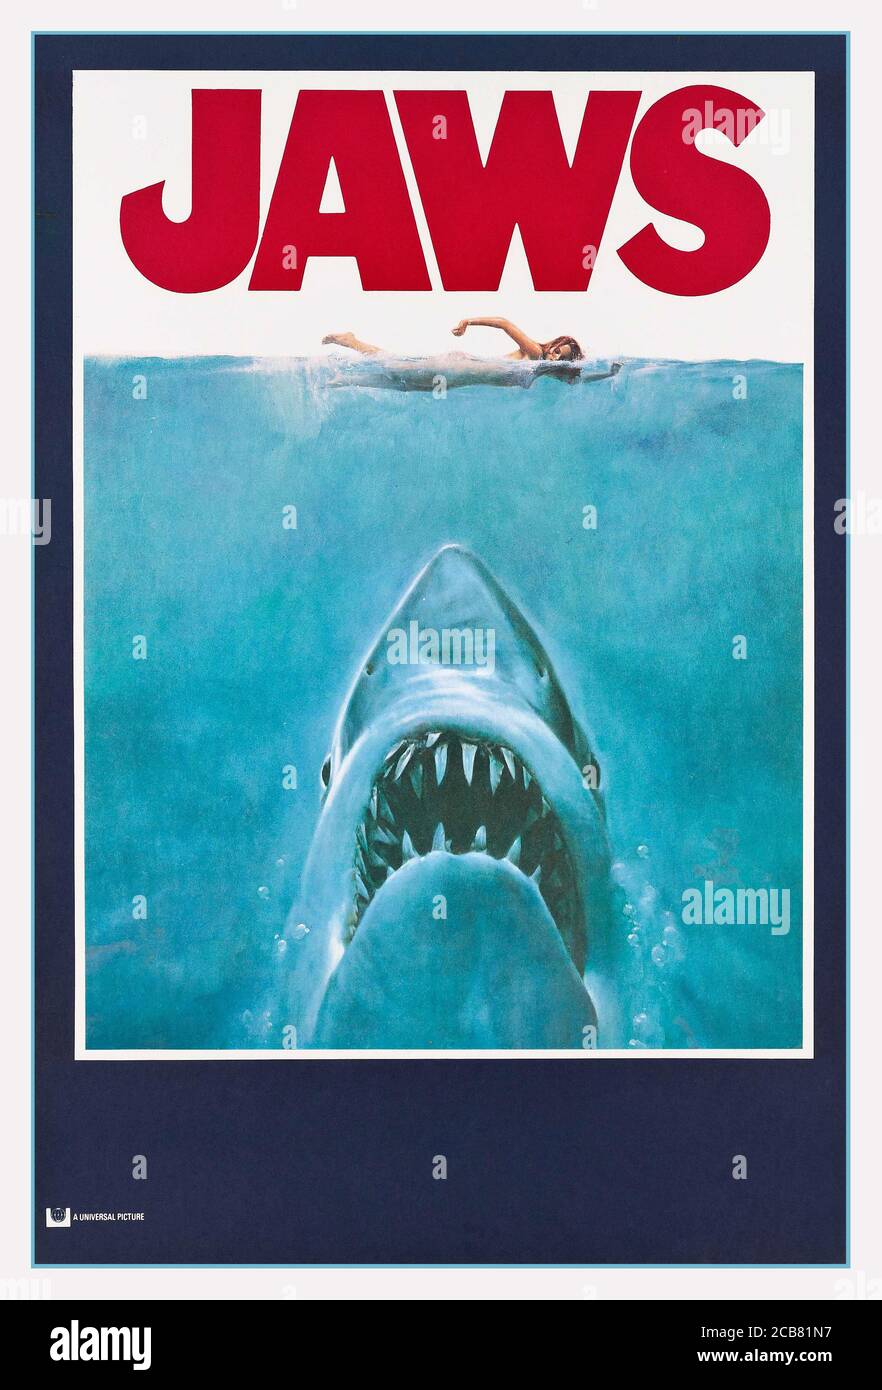 JAWS Vintage movie poster JAWS (1975)  recipient of an Academy Award Nomination for Best Picture and winner of Oscars for film editing (Verna Fields) and music score (John Williams). With Robert Shaw, Roy Scheider Martin Brody, Richard Dreyfuss, Lorraine Gary, Murray Hamilton, Director Steven Spielberg, Screenplay Peter Benchley and Carl Gottlieb Stock Photo